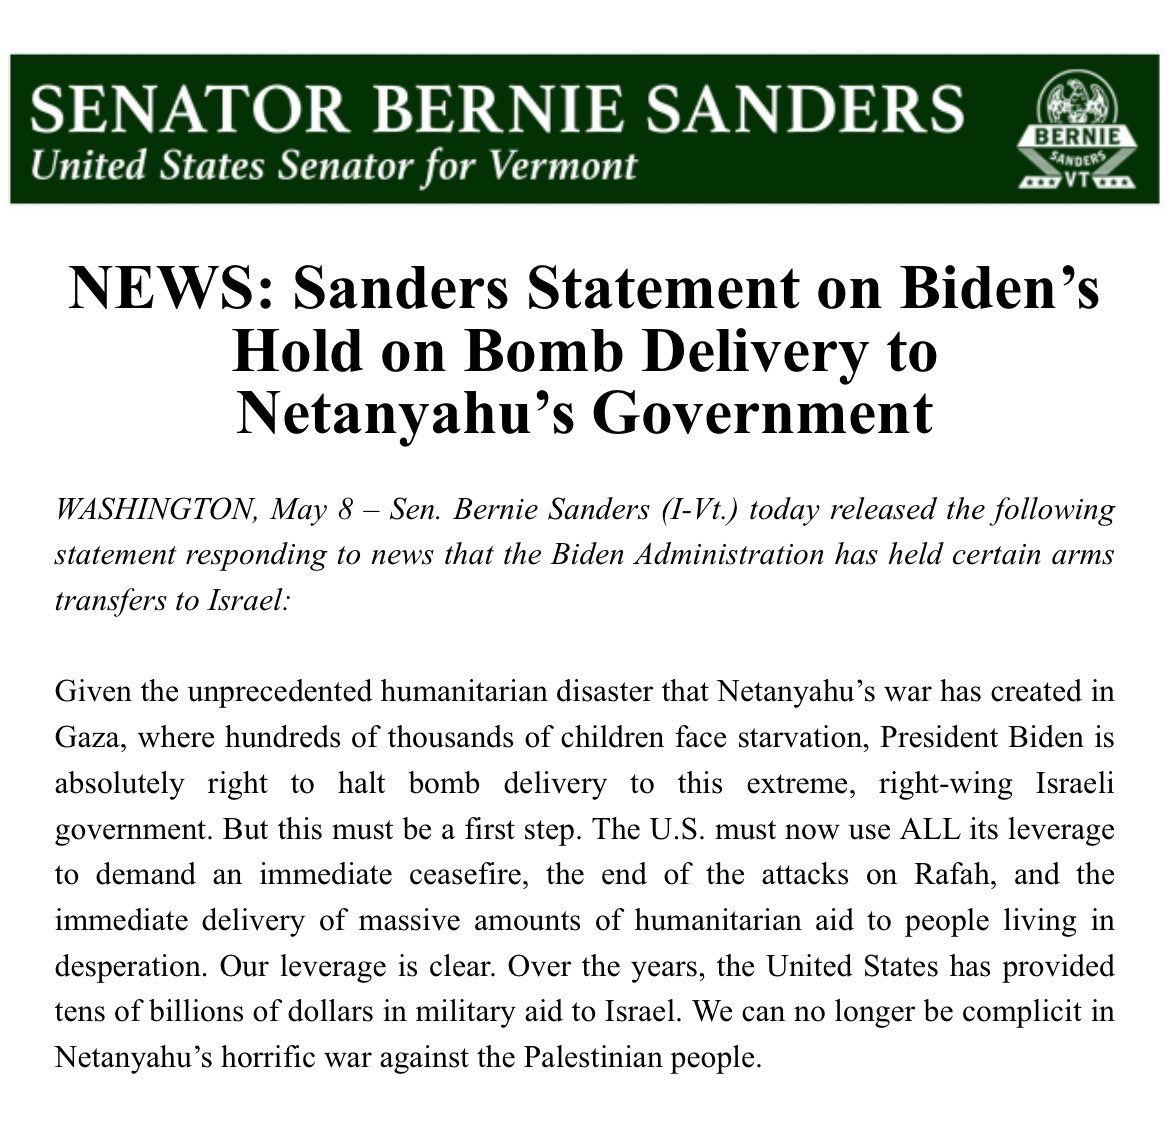 President Biden is right to halt bomb deliveries to this extreme Israeli government. But this must be a first step. The U.S. must now use ALL its leverage to demand a ceasefire, stop attacks on Rafah, and secure delivery of massive humanitarian aid throughout Gaza.